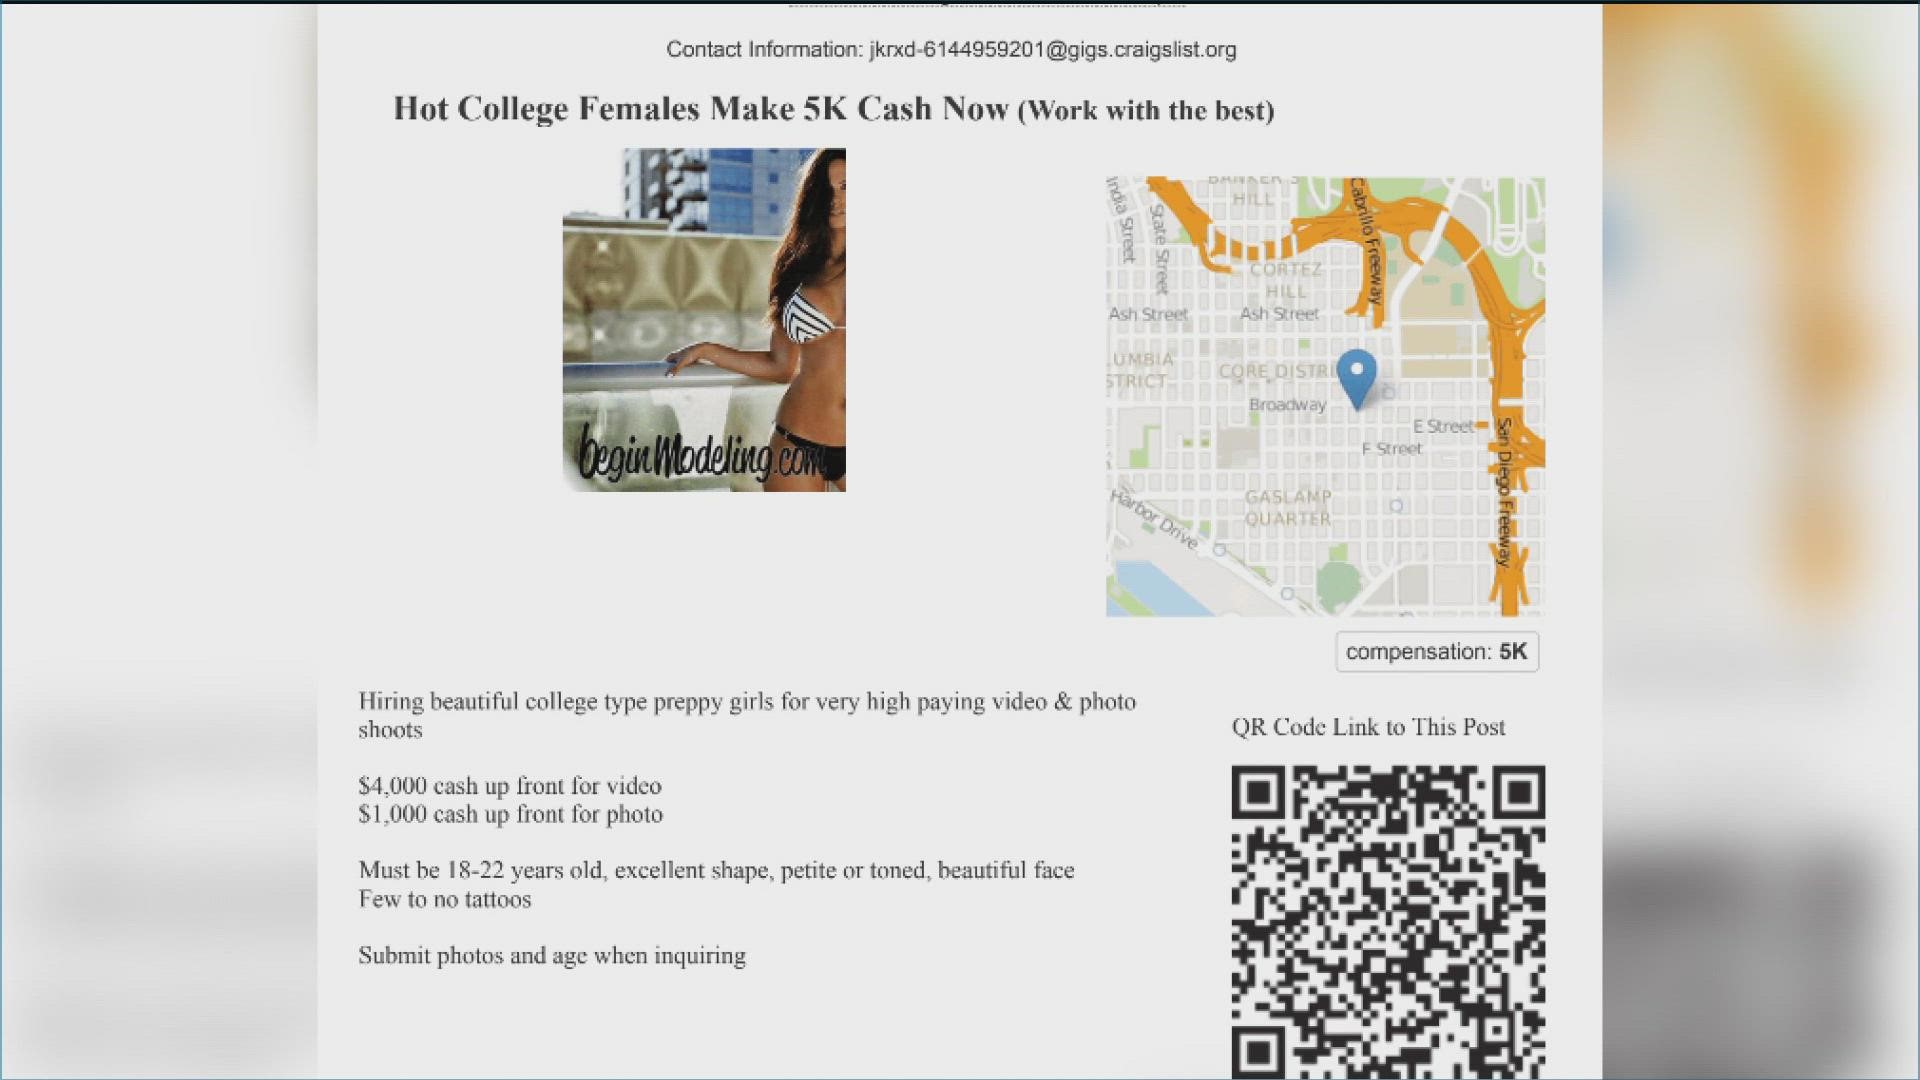 GirlsDoPorn owner placed on FBIs top 10 most wanted list cbs8